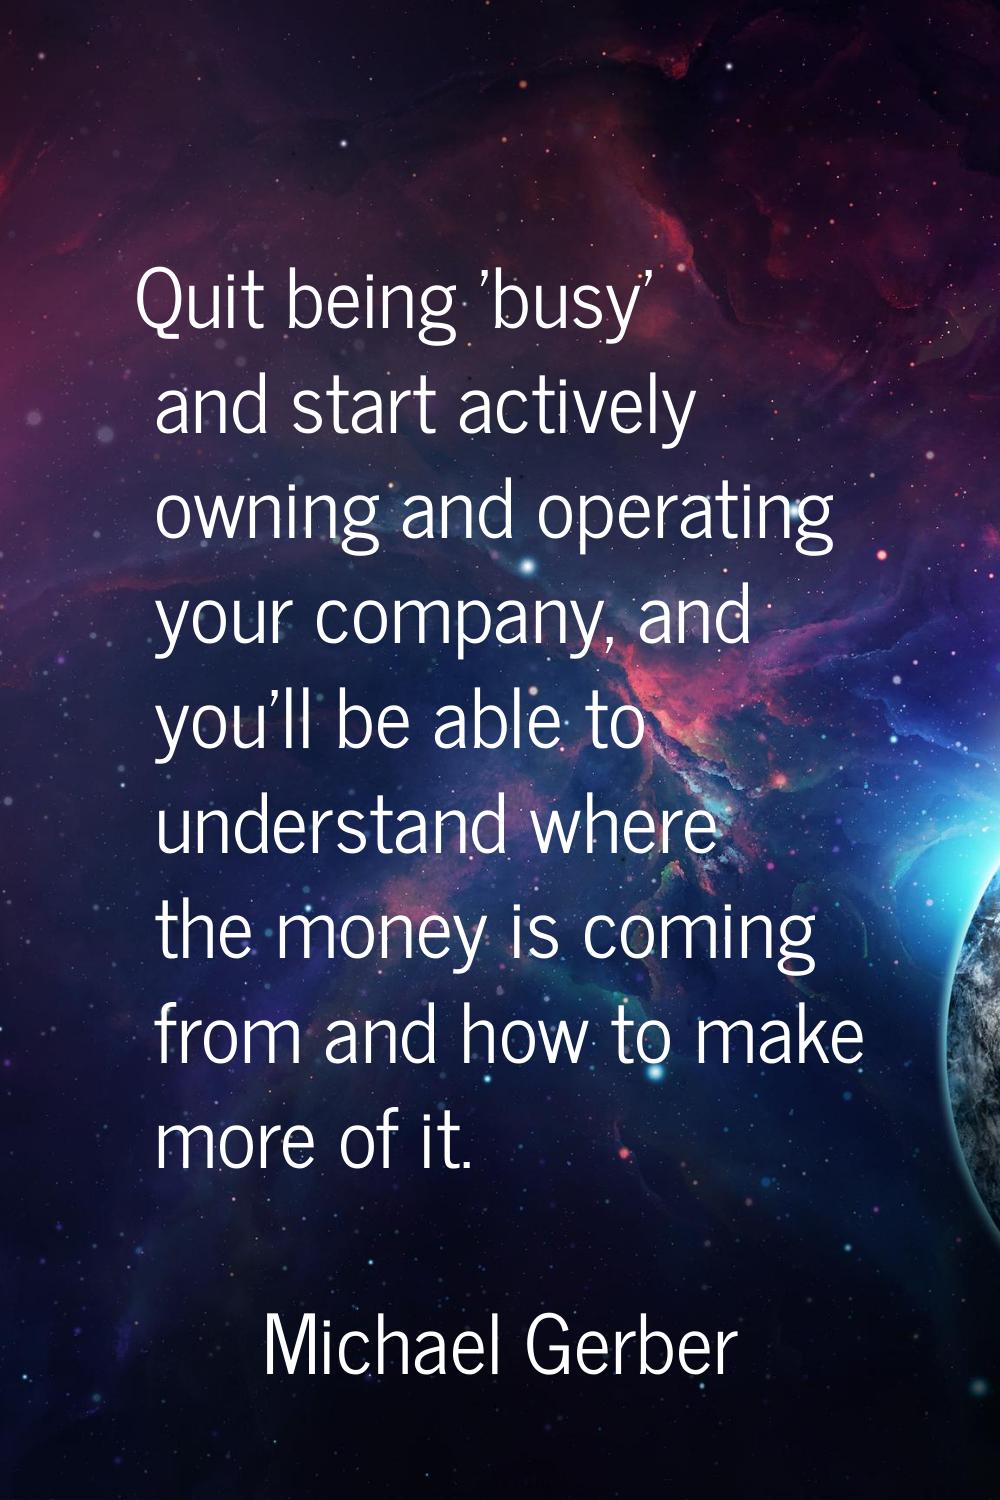 Quit being 'busy' and start actively owning and operating your company, and you'll be able to under